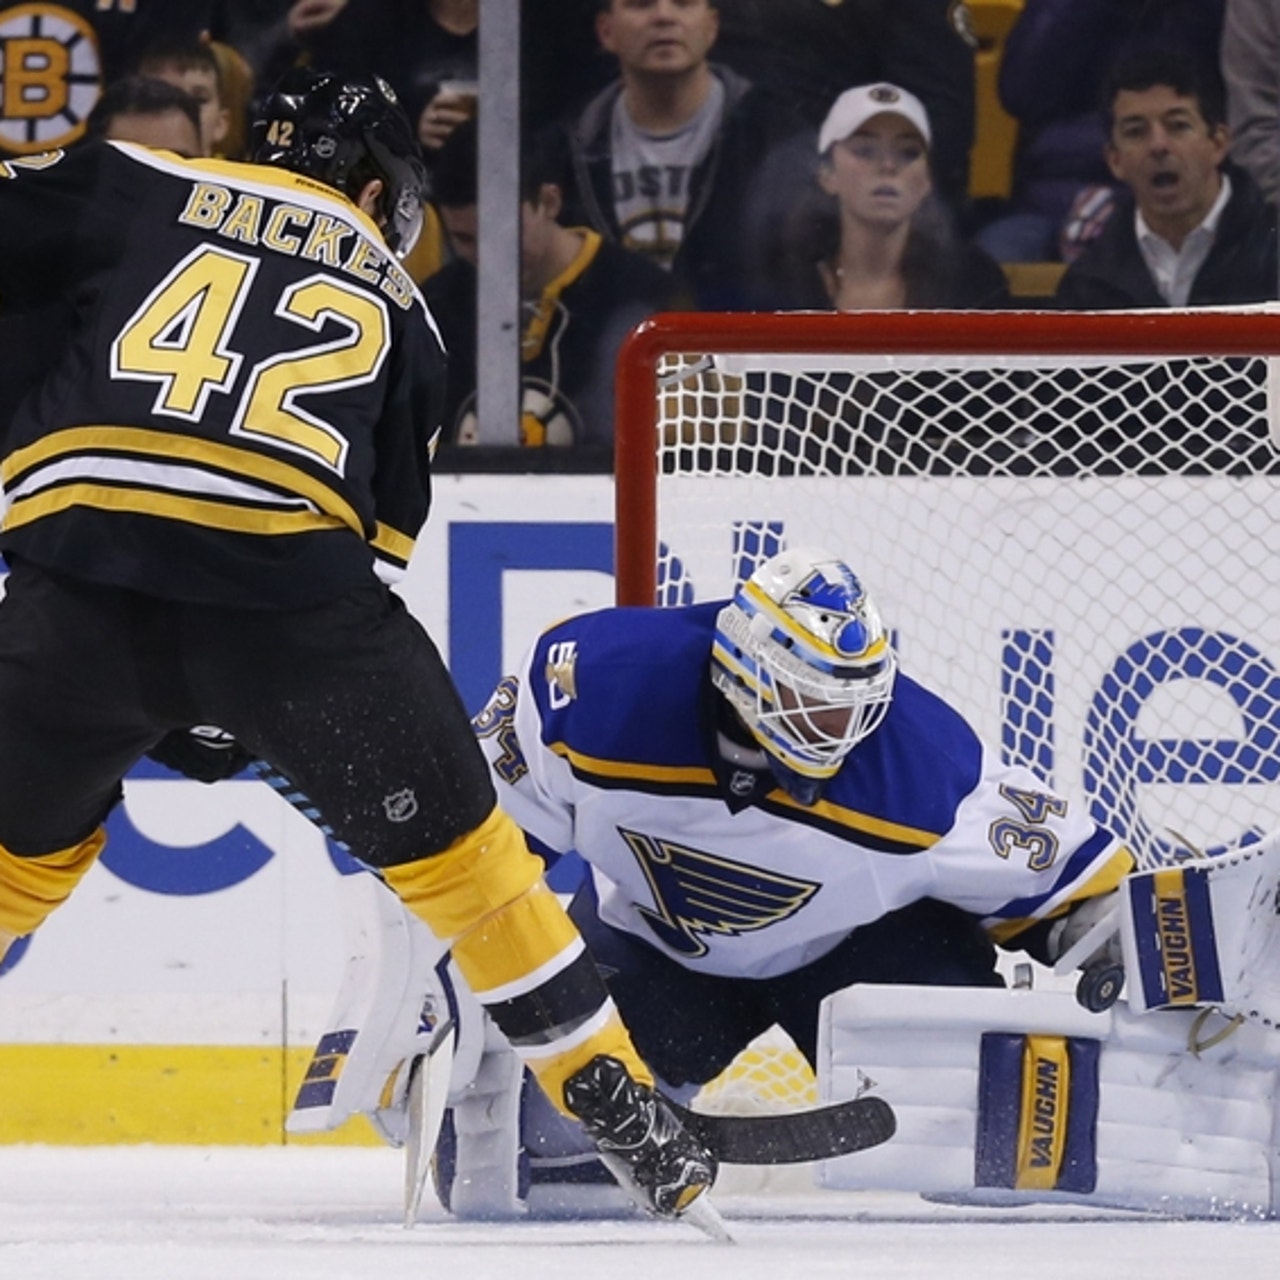 Bruins were glad to see old friend Torey Krug back in town with